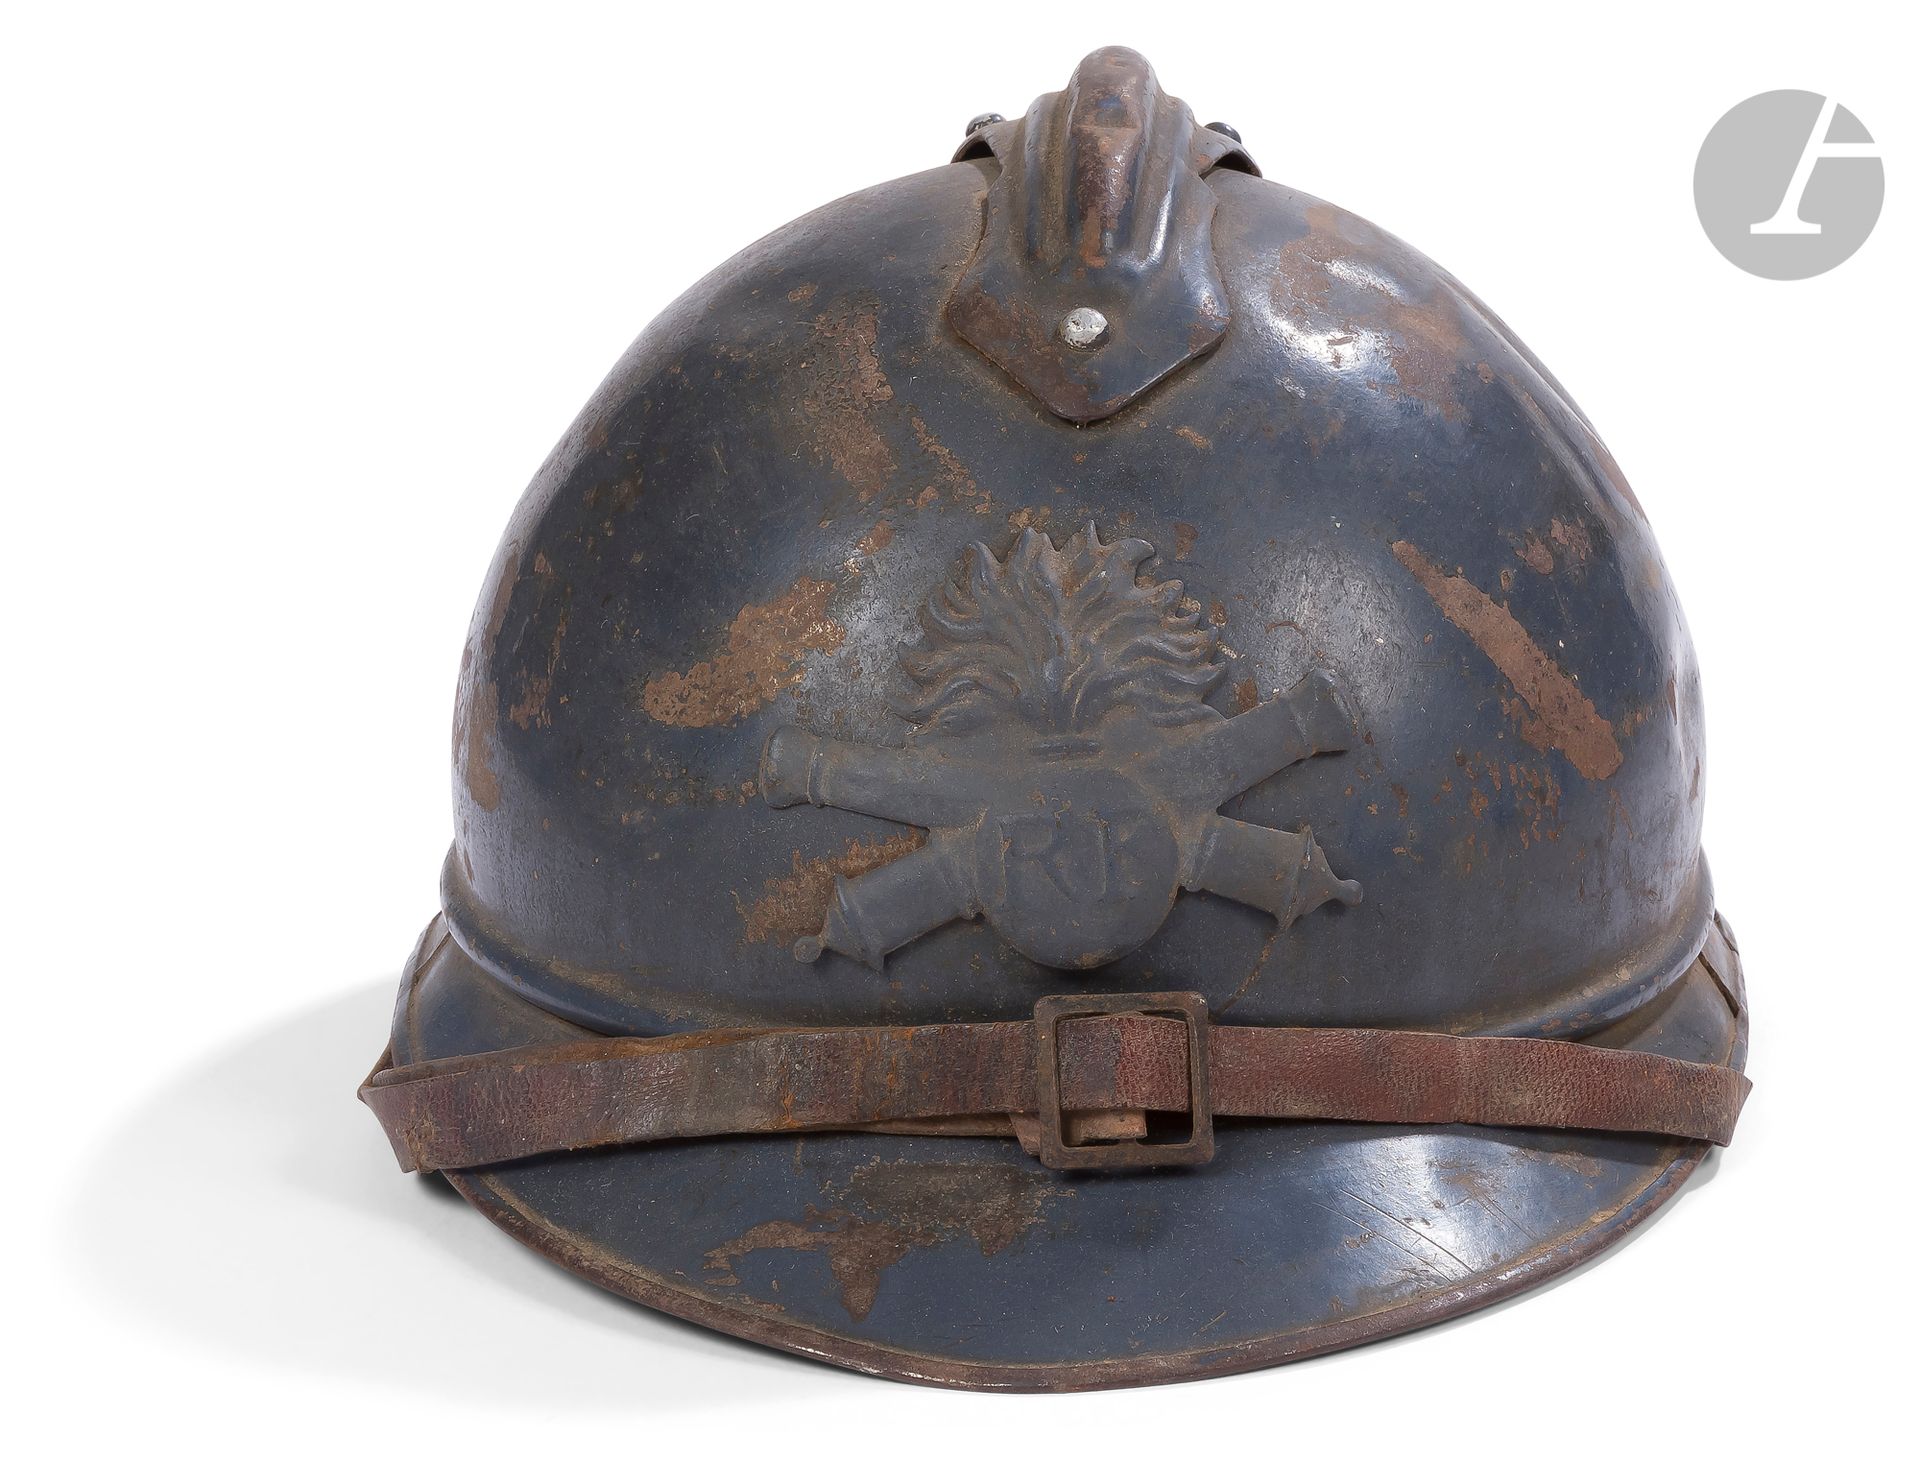 Null Adrian 15 artillery helmet.
Blue color. 
Brown leather interior lined with &hellip;